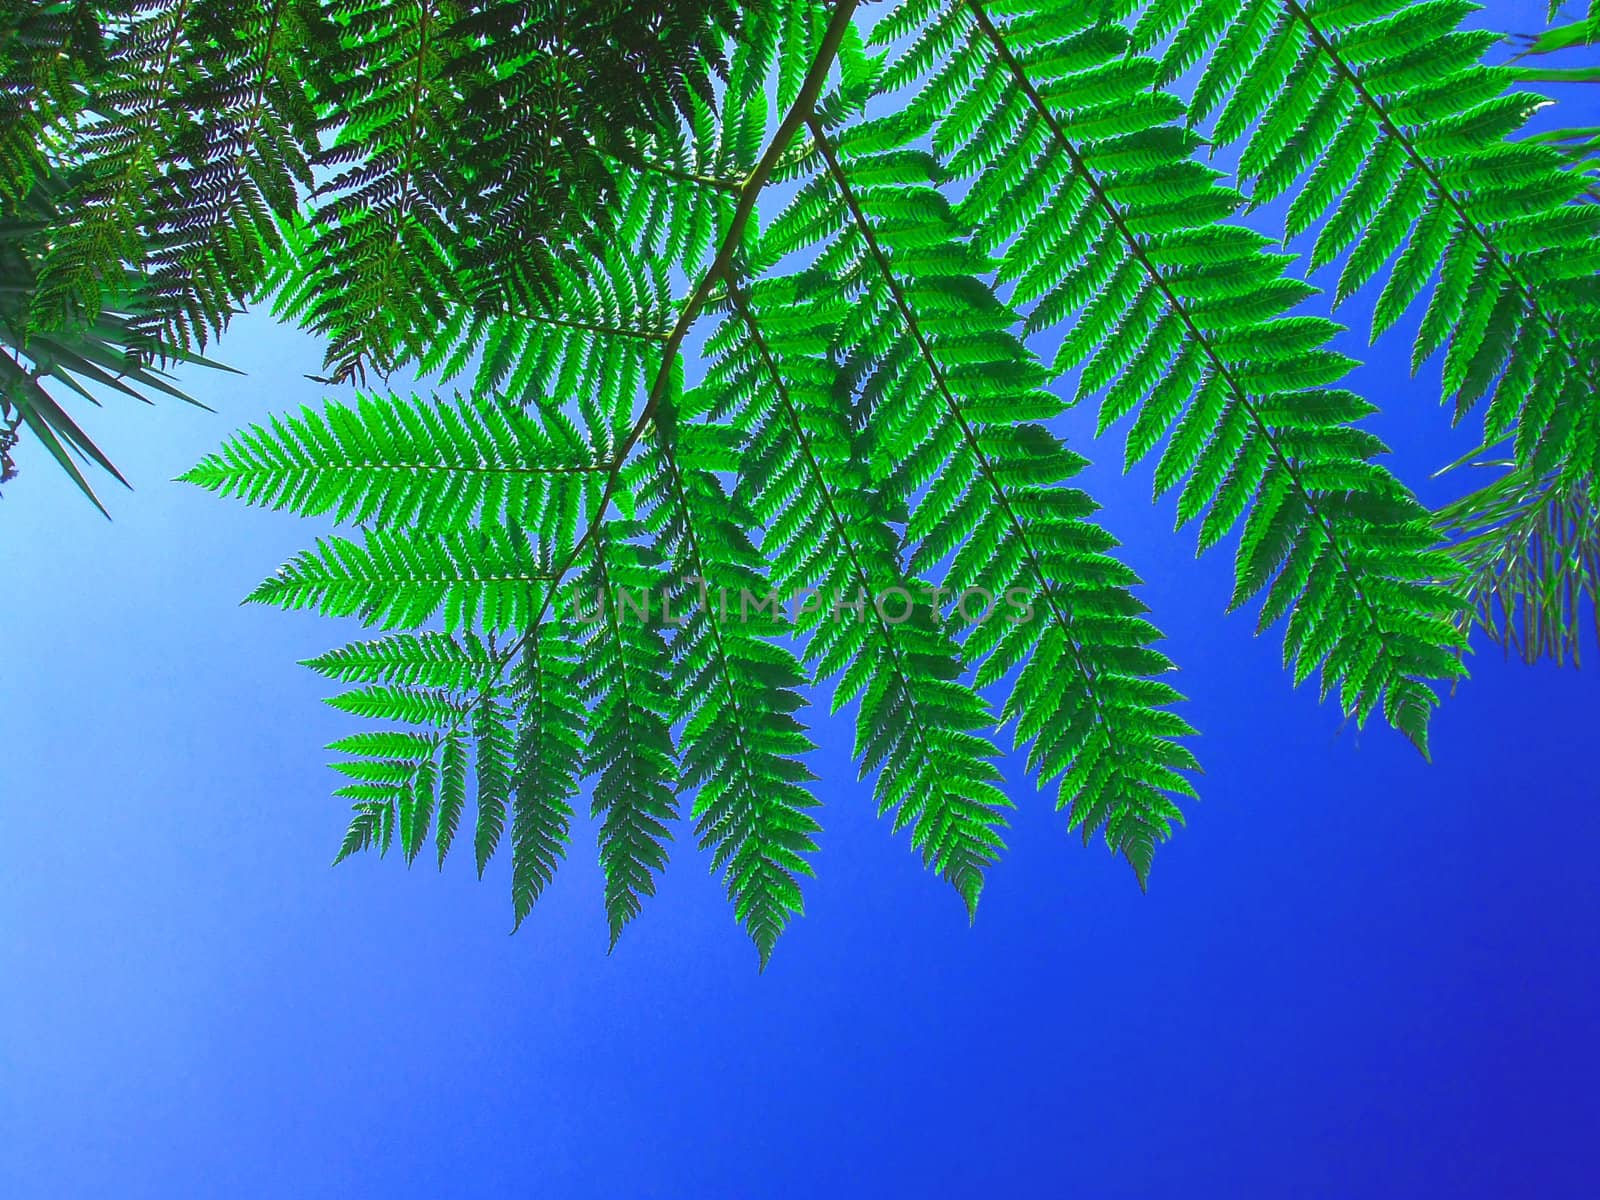 Bright green fern against blue sky by ChrisAlleaume